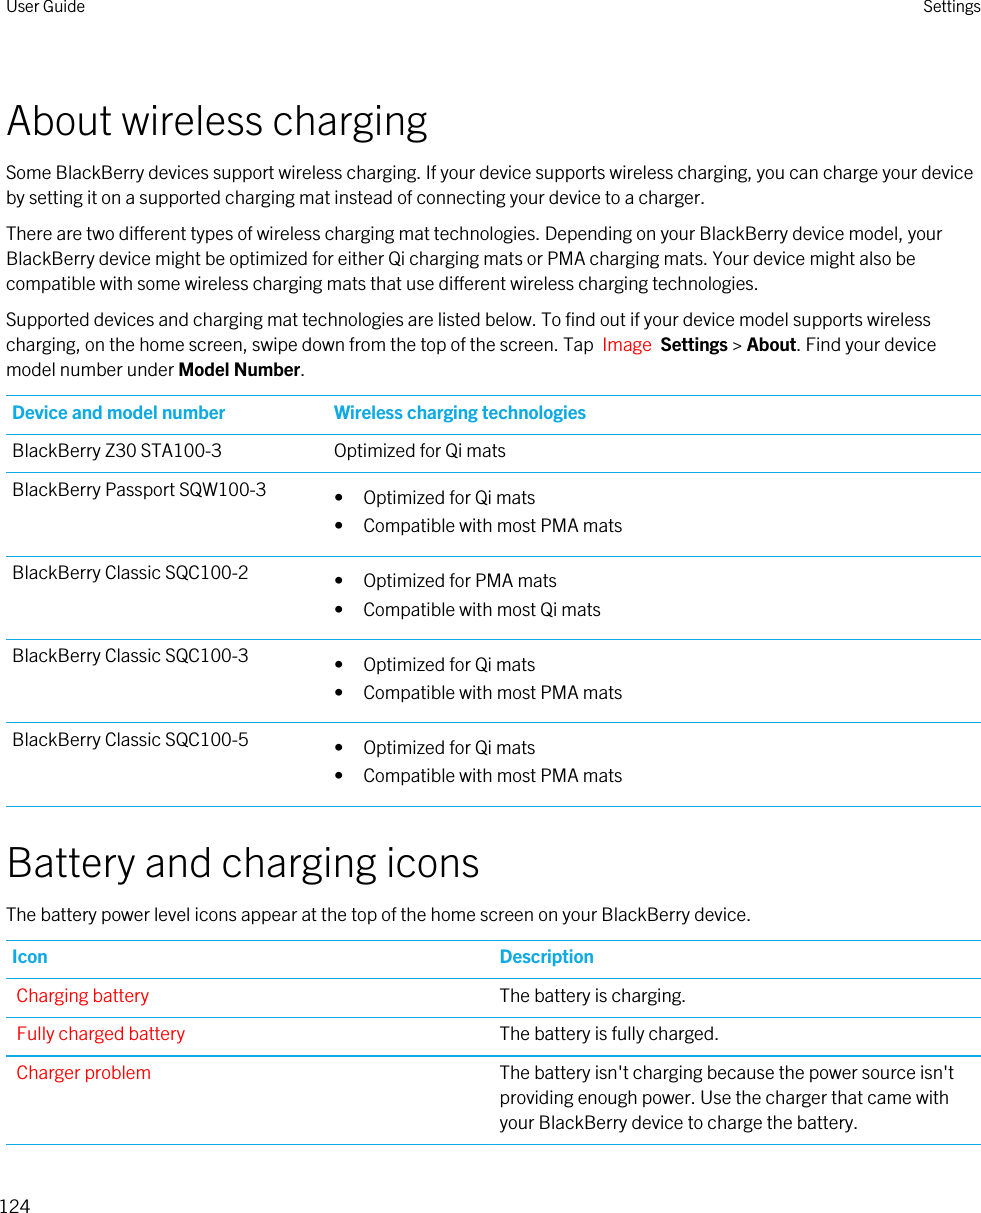 About wireless chargingSome BlackBerry devices support wireless charging. If your device supports wireless charging, you can charge your device by setting it on a supported charging mat instead of connecting your device to a charger.There are two different types of wireless charging mat technologies. Depending on your BlackBerry device model, your BlackBerry device might be optimized for either Qi charging mats or PMA charging mats. Your device might also be compatible with some wireless charging mats that use different wireless charging technologies.Supported devices and charging mat technologies are listed below. To find out if your device model supports wireless charging, on the home screen, swipe down from the top of the screen. Tap  Image  Settings &gt; About. Find your device model number under Model Number.Device and model number Wireless charging technologiesBlackBerry Z30 STA100-3 Optimized for Qi matsBlackBerry Passport SQW100-3 • Optimized for Qi mats• Compatible with most PMA matsBlackBerry Classic SQC100-2 • Optimized for PMA mats• Compatible with most Qi matsBlackBerry Classic SQC100-3 • Optimized for Qi mats• Compatible with most PMA matsBlackBerry Classic SQC100-5 • Optimized for Qi mats• Compatible with most PMA matsBattery and charging iconsThe battery power level icons appear at the top of the home screen on your BlackBerry device.Icon DescriptionCharging battery The battery is charging.Fully charged battery The battery is fully charged.Charger problem The battery isn&apos;t charging because the power source isn&apos;t providing enough power. Use the charger that came with your BlackBerry device to charge the battery.User Guide Settings124